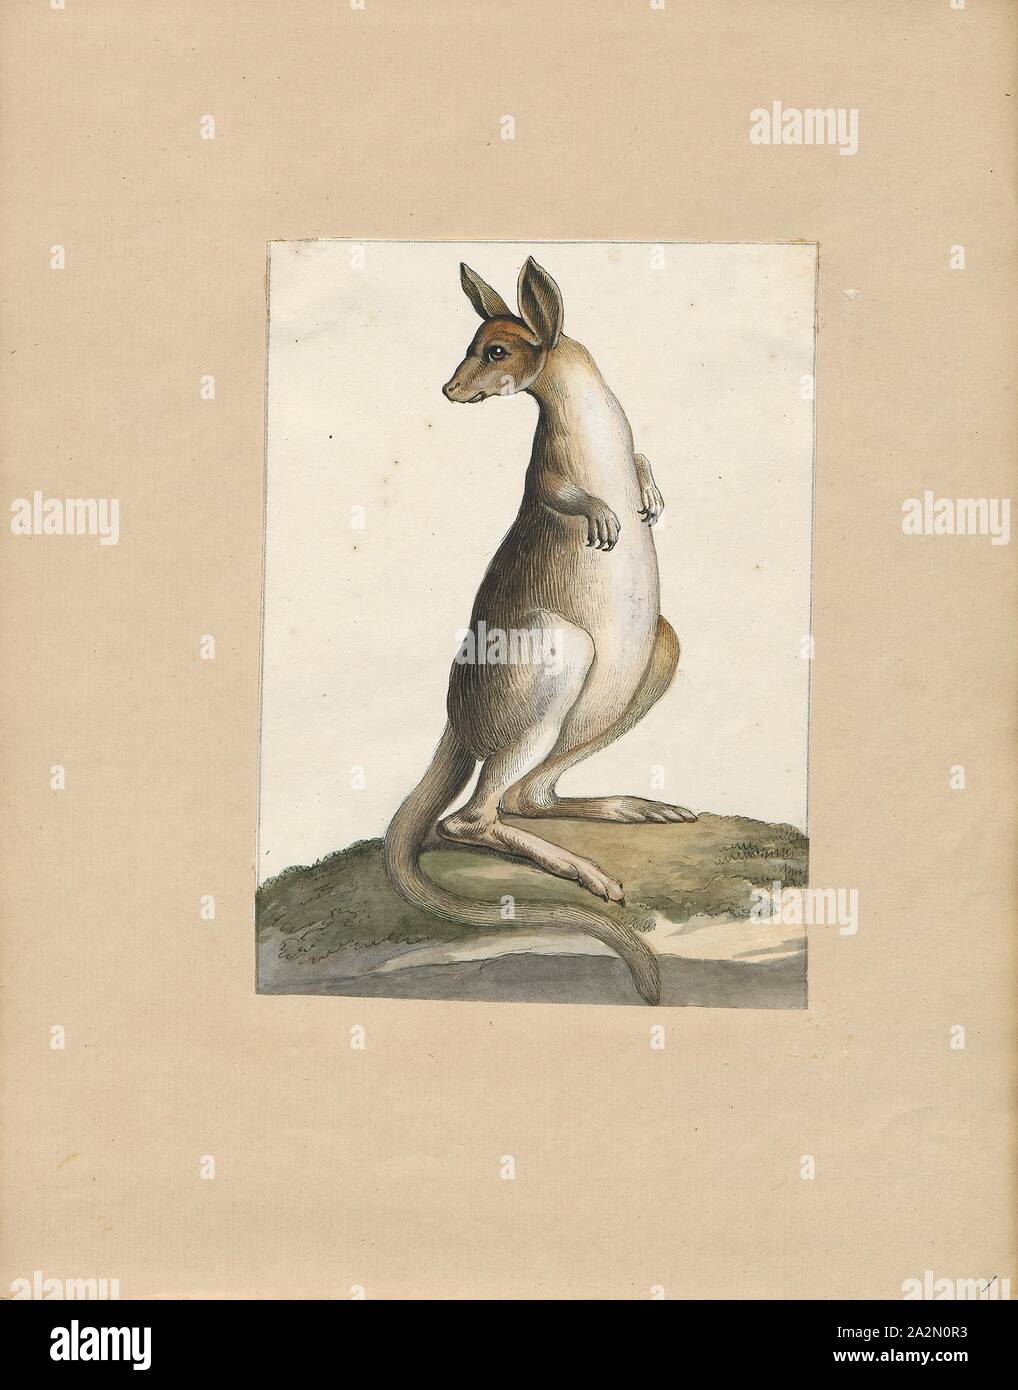 Macropus giganteus, Print, The eastern grey kangaroo (Macropus giganteus) is a marsupial found in southern and eastern Australia, with a population of several million. It is also known as the great grey kangaroo and the forester kangaroo. Although a big eastern grey male typically masses around 66 kg (weight 145 lb.) and stands almost 2 m (6.6 ft.) tall, the scientific name, Macropus giganteus (gigantic large-foot), is misleading: the red kangaroo of the semi-arid inland is larger, weighing up to 90 kg., 1700-1880 Stock Photo